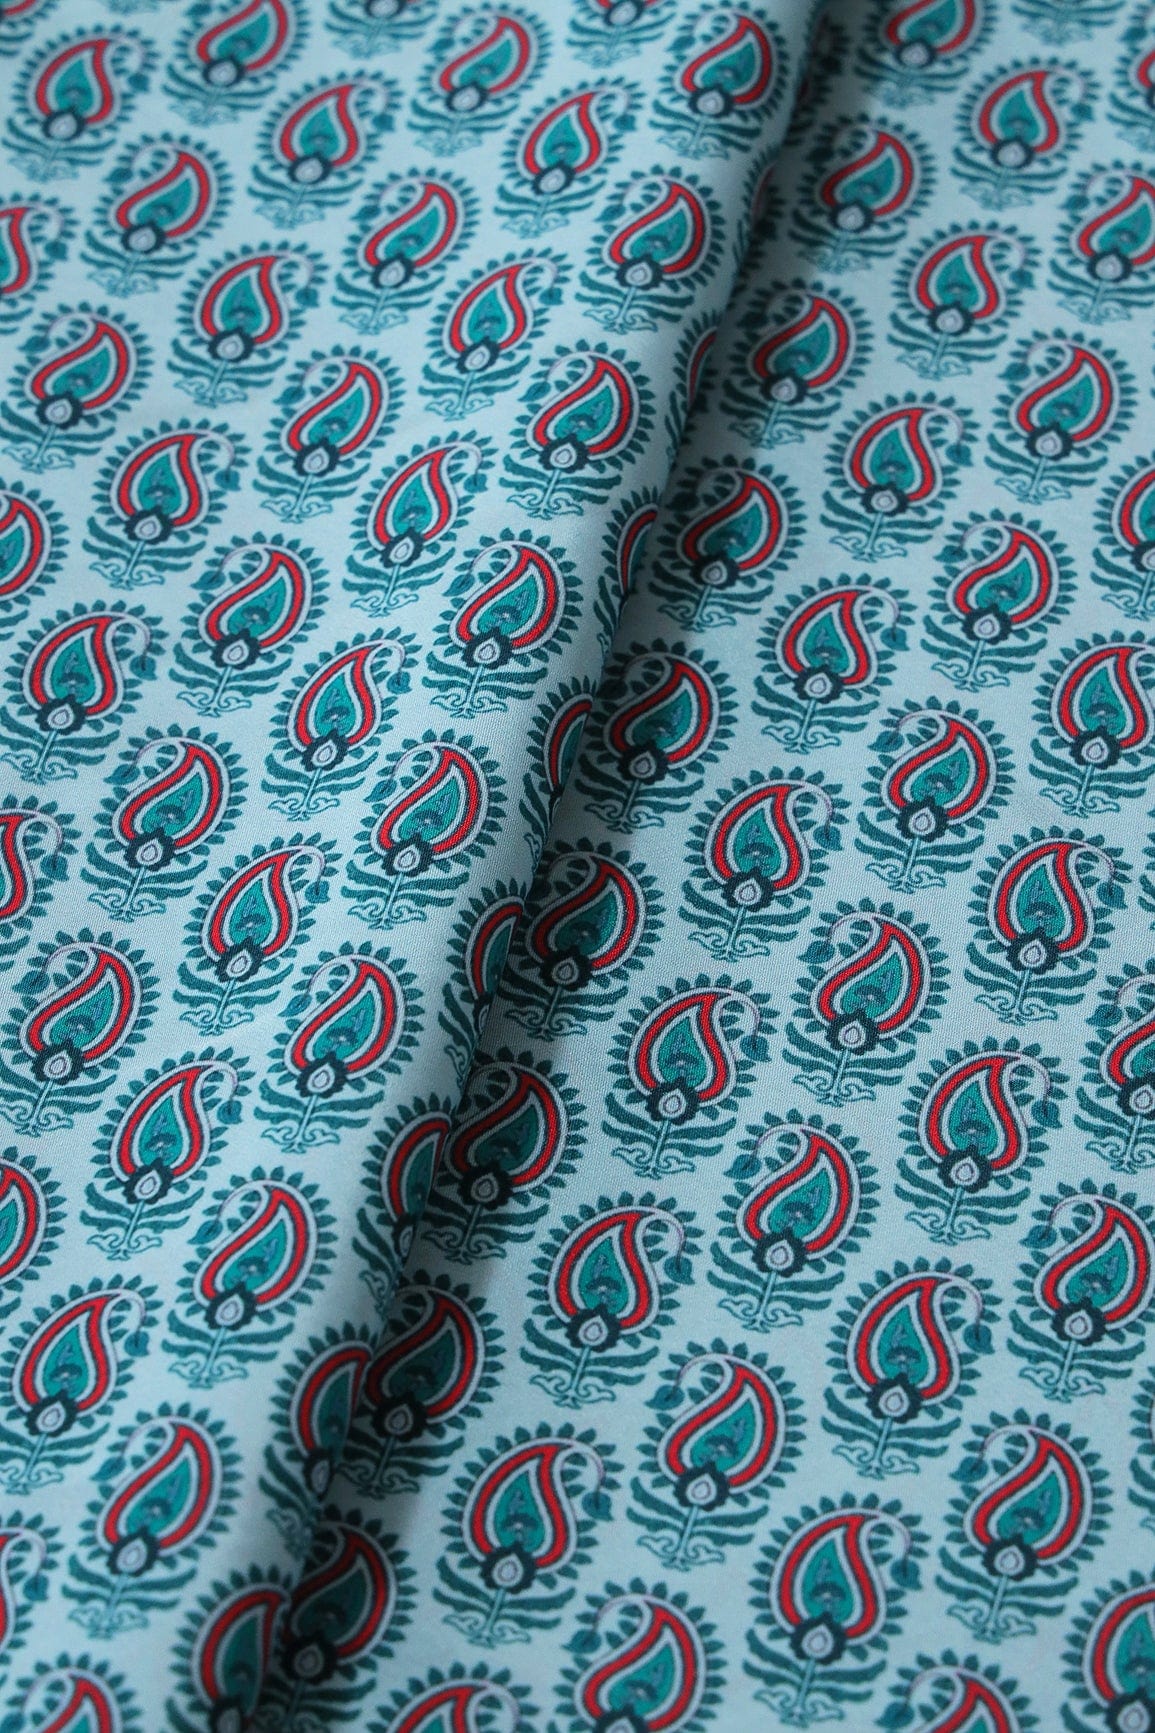 doeraa Prints Red And Green Paisley Pattern Digital Print On Light Blue French Crepe Fabric